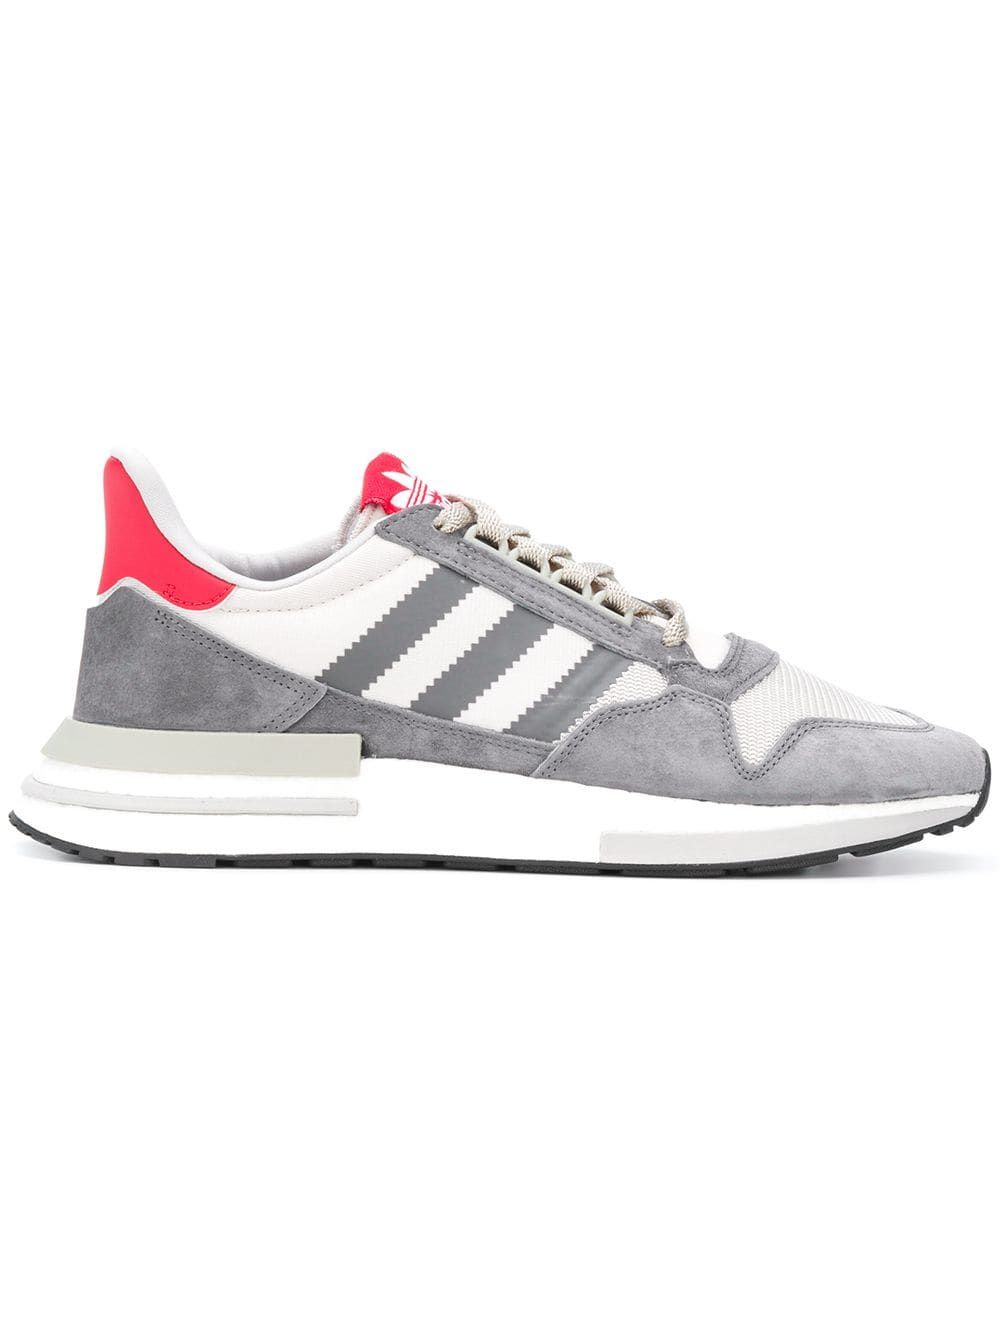 opføre sig rapport Gentagen The Best Adidas Sneakers - Classic Adidas Shoes on Sale Right Now